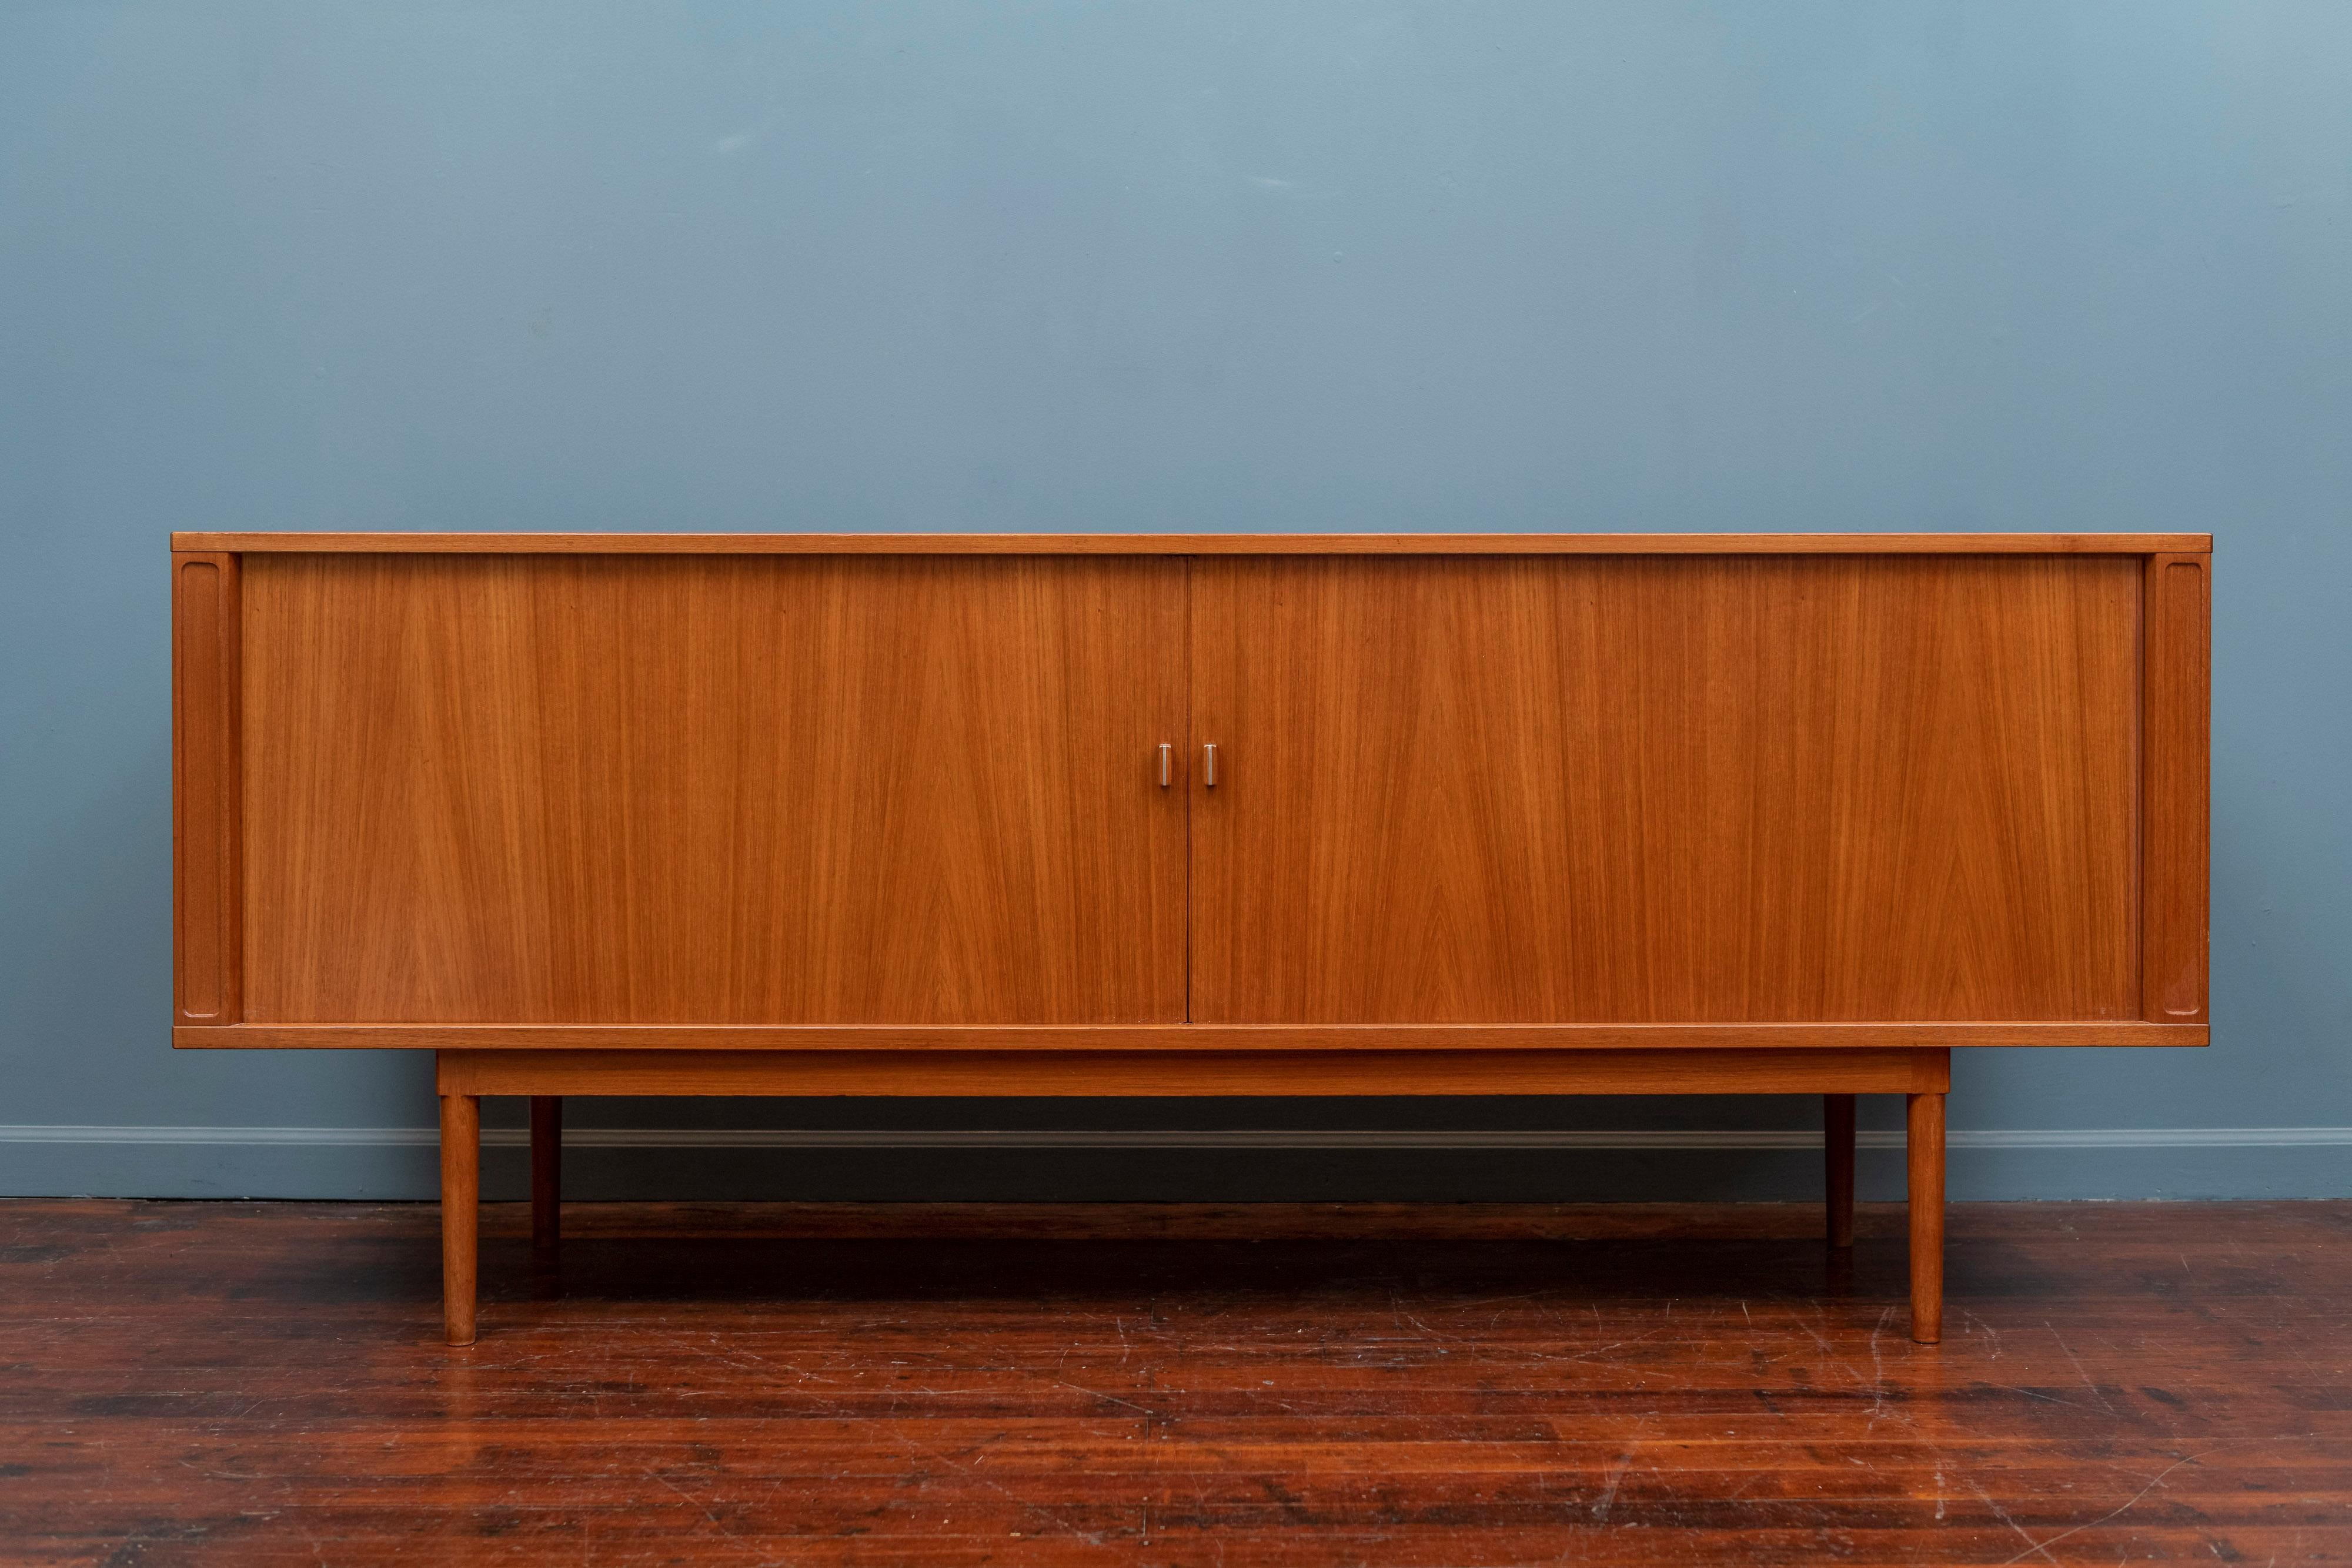 Jens Quistgaard design teak credenza for Peter Lovig Nielsen furniture, Denmark. Simple clean lines with tambor doors and a fitted adjustable interior. Newly refinished and ready to install.